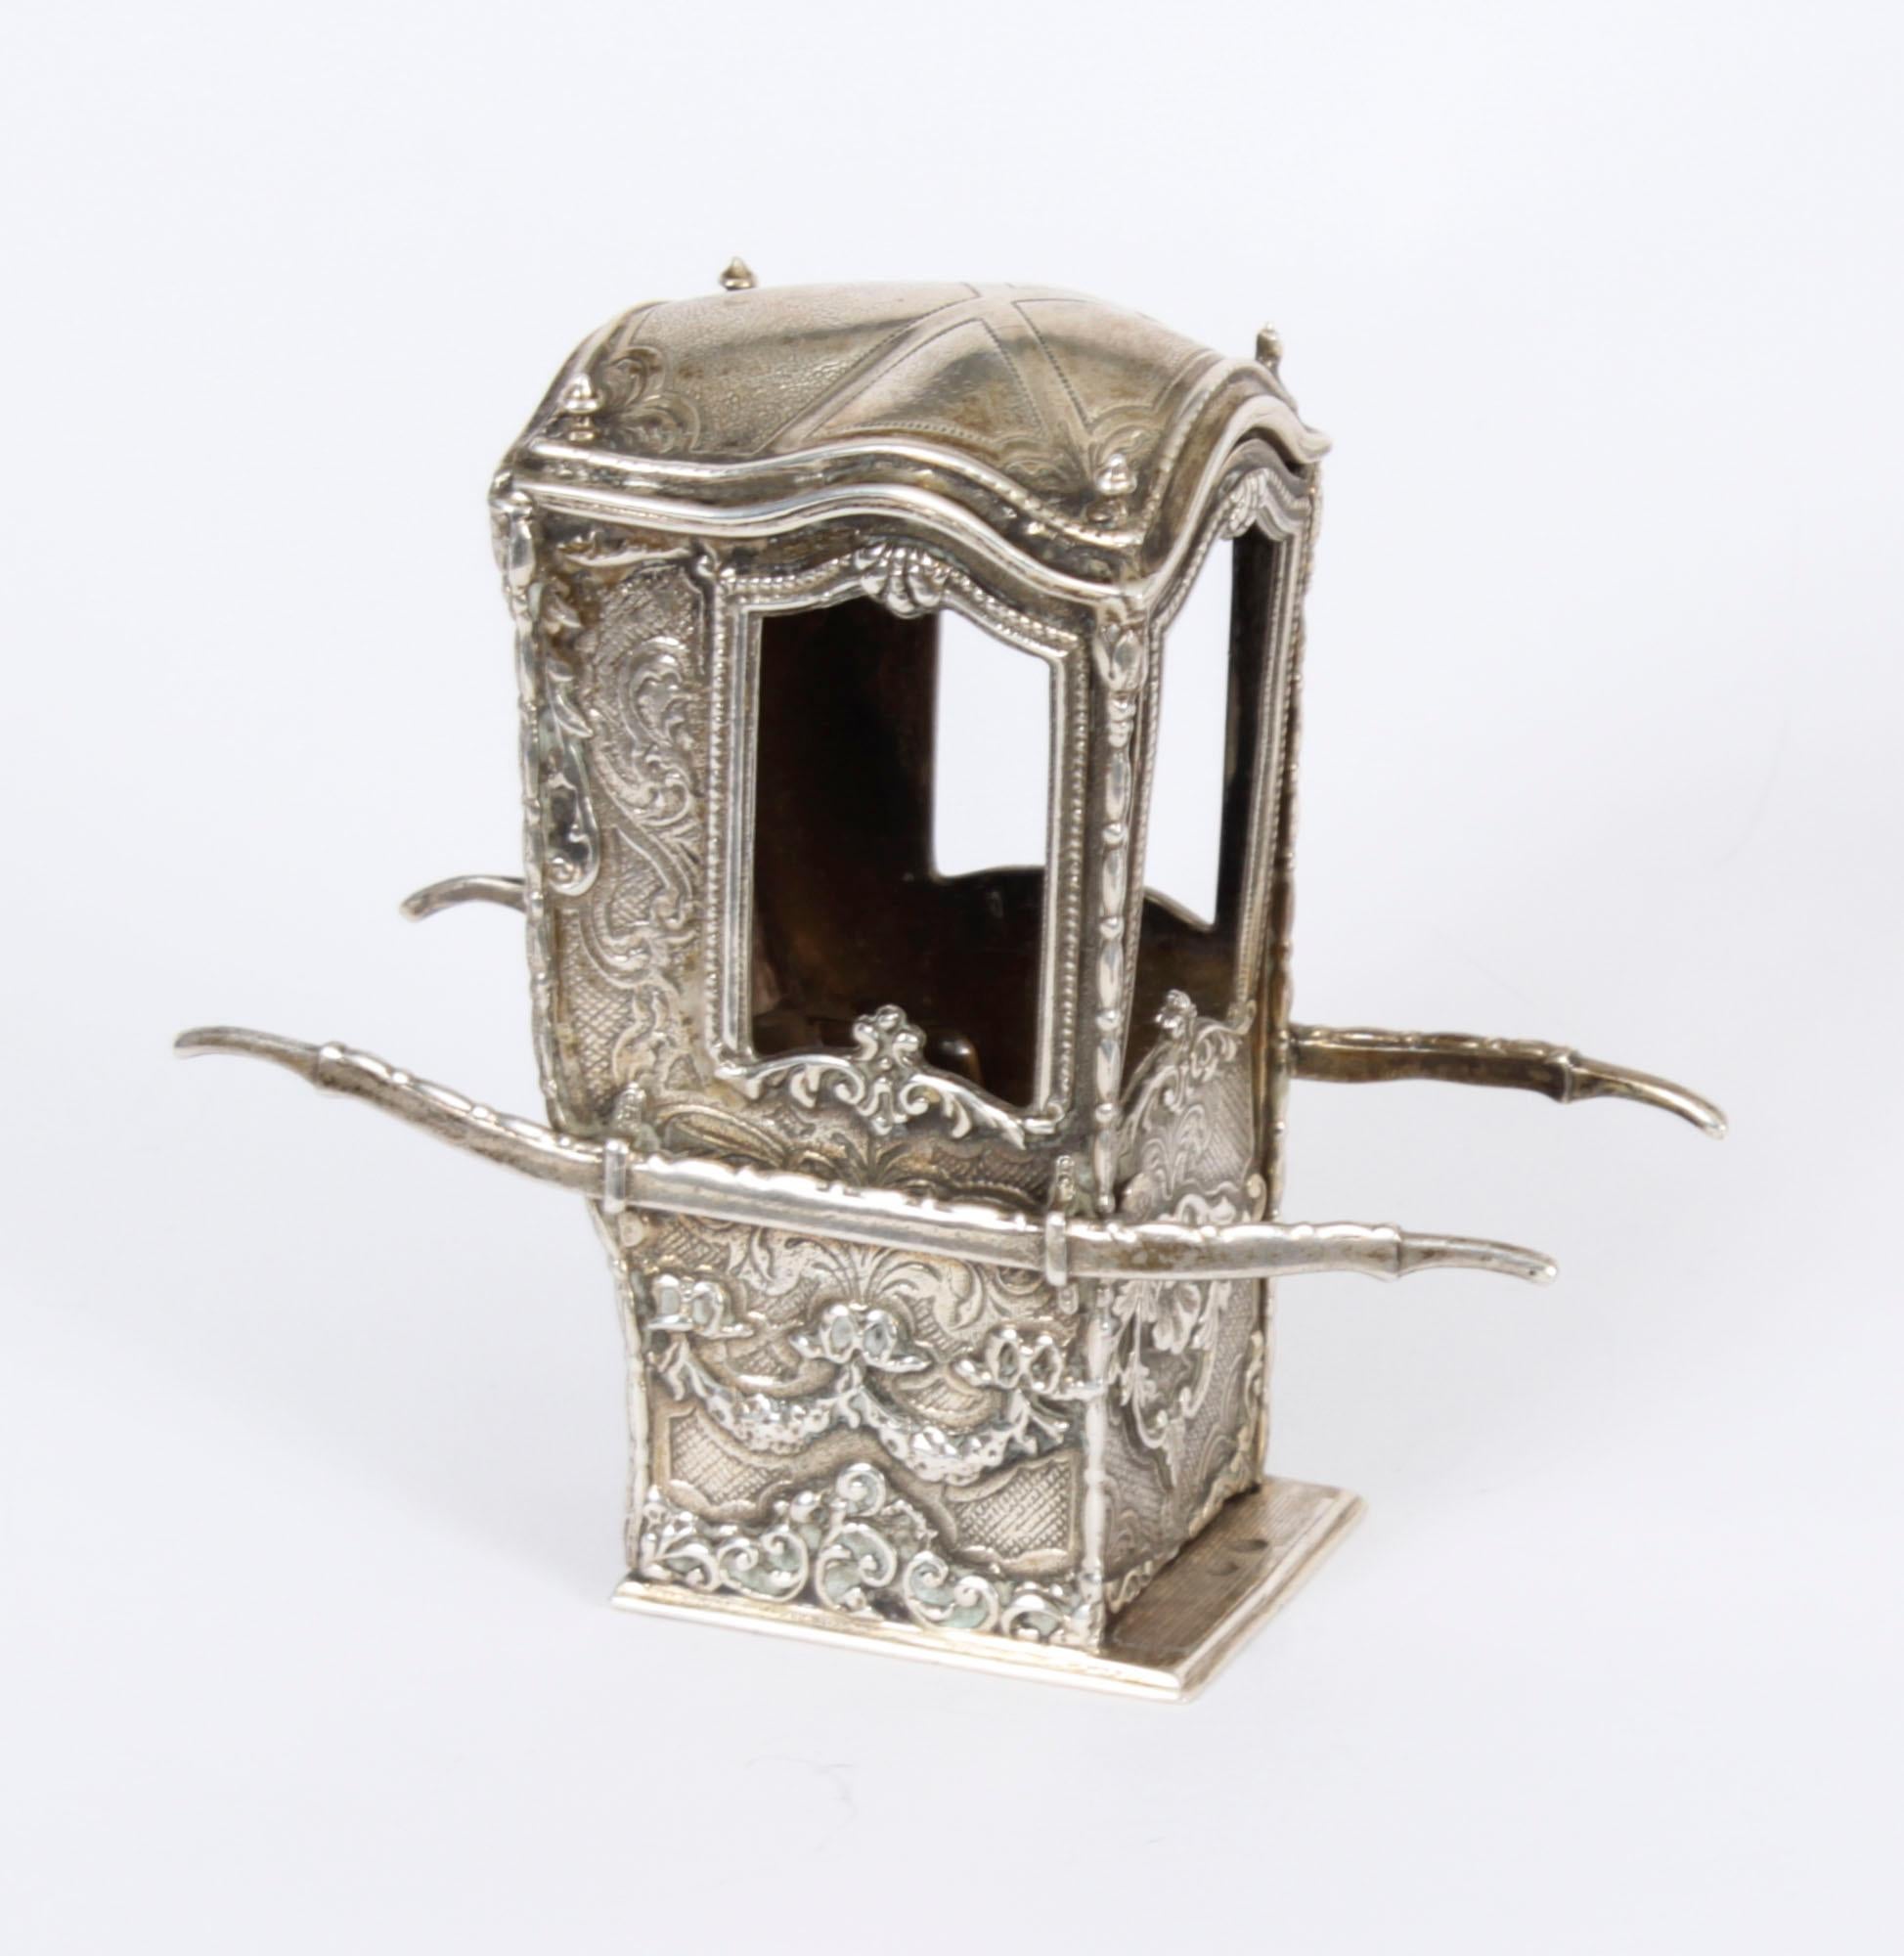 AntiqueFrench Silver Miniature Sedan Chair 19th Century For Sale 15